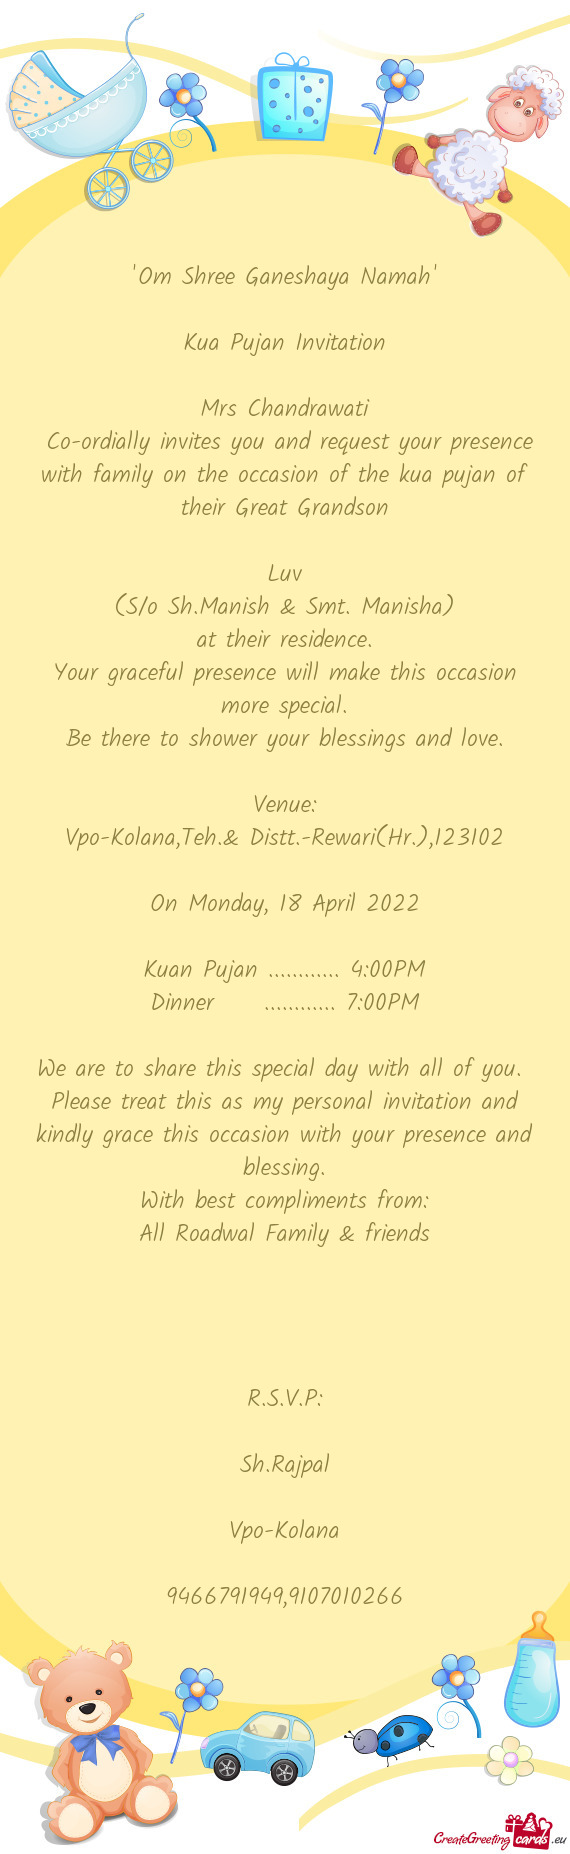 Co-ordially invites you and request your presence with family on the occasion of the kua pujan of t